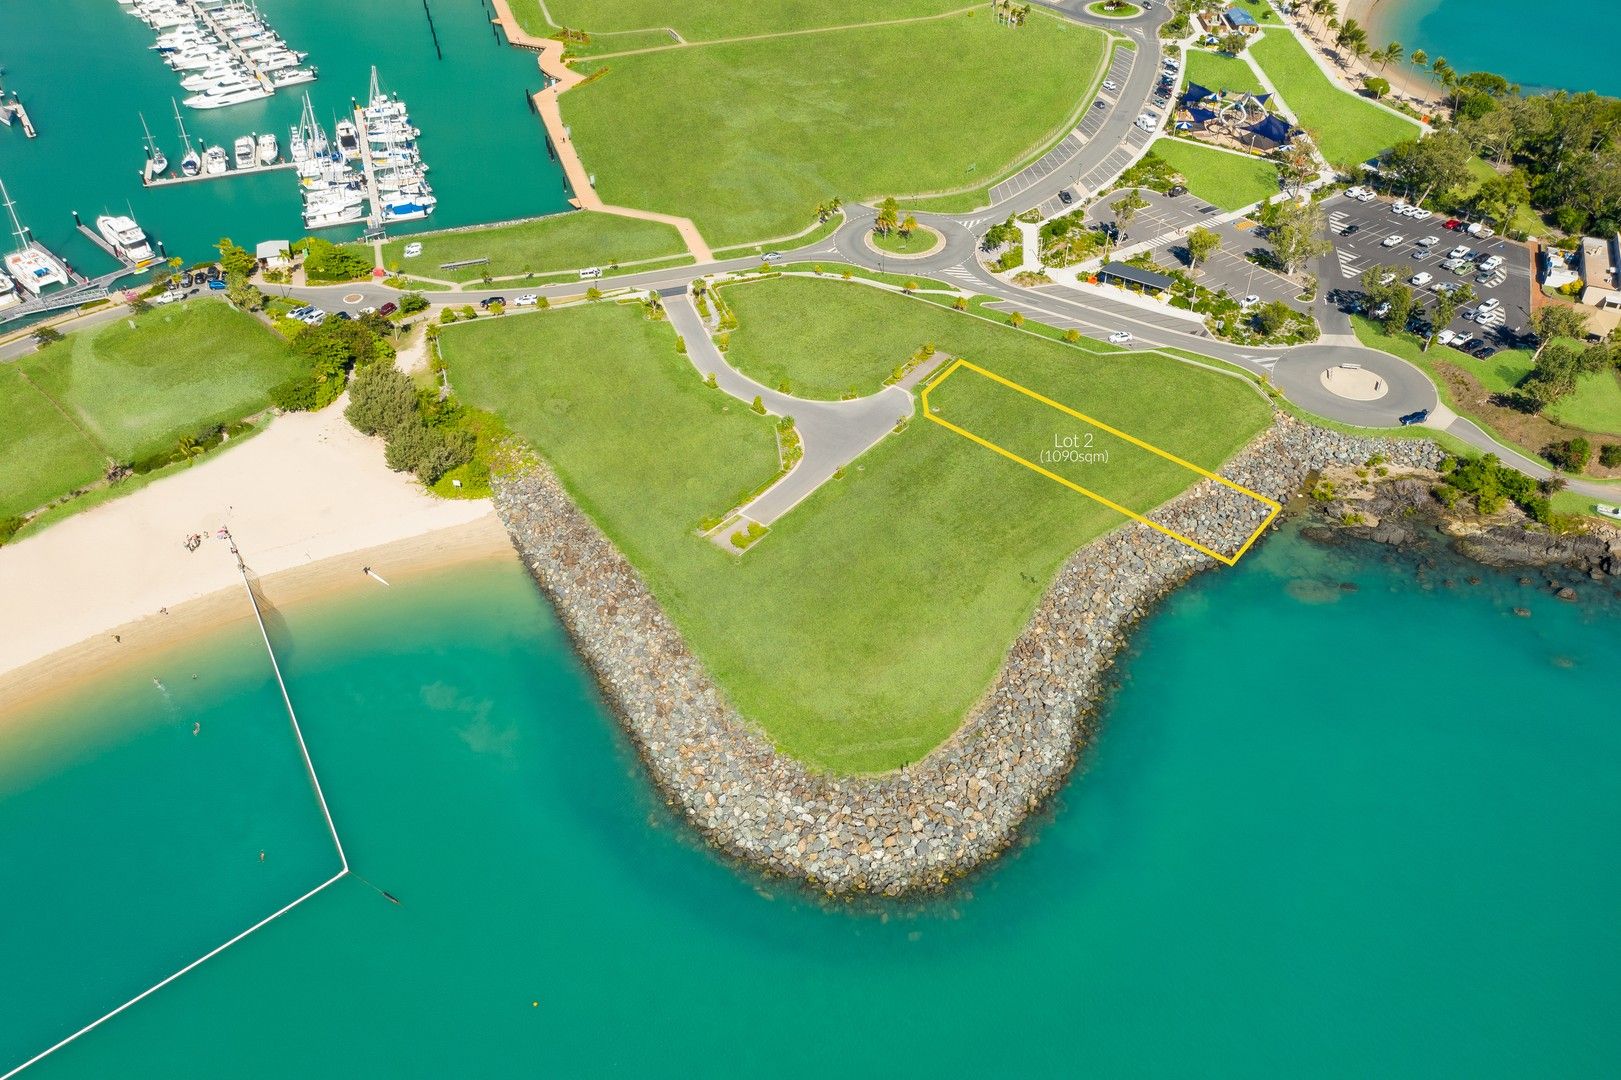 Lot 2 Airlie Esplanade, One Airlie, Airlie Beach QLD 4802, Image 2